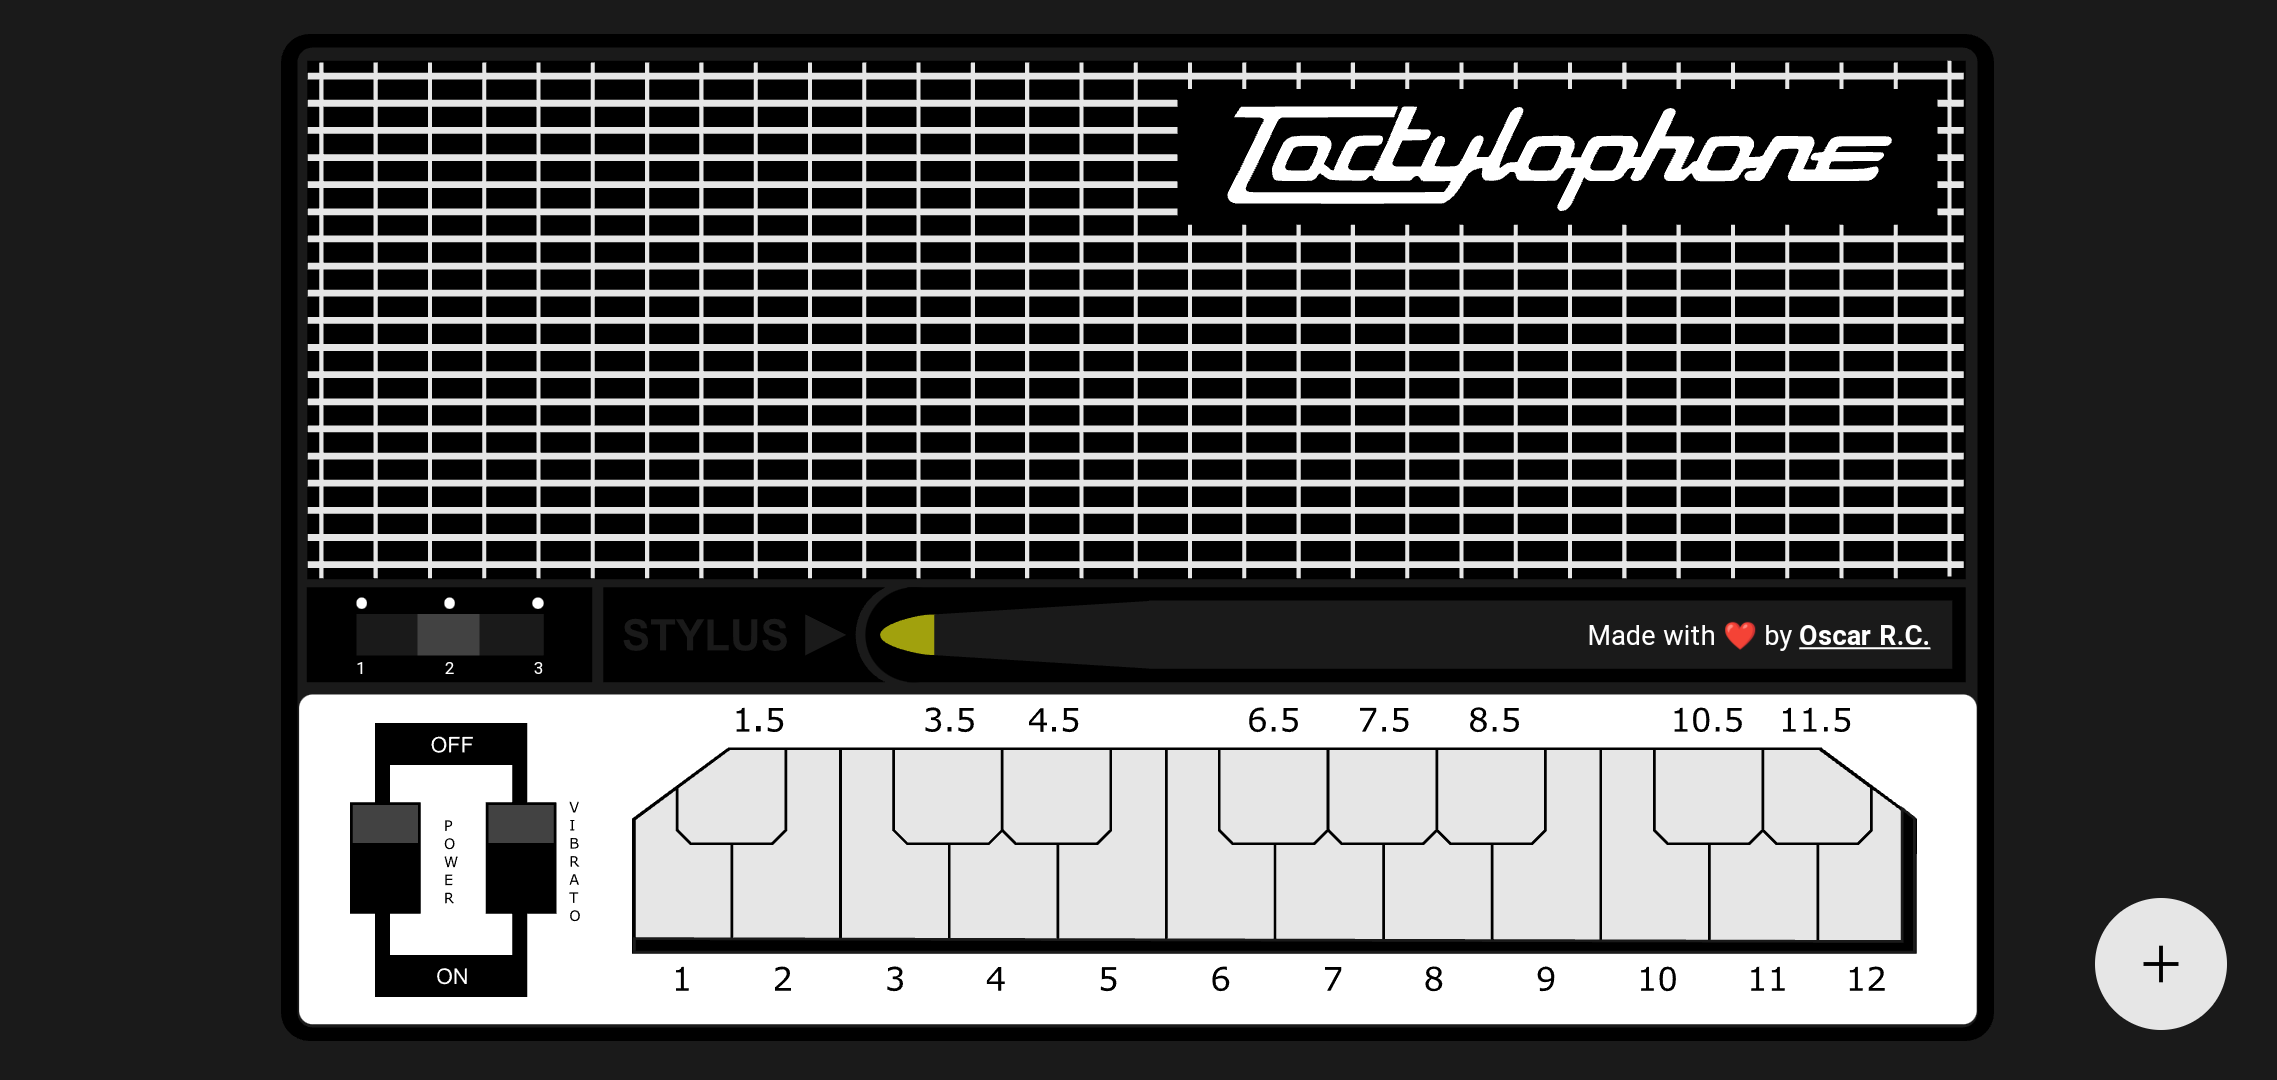 Tactylophone layout